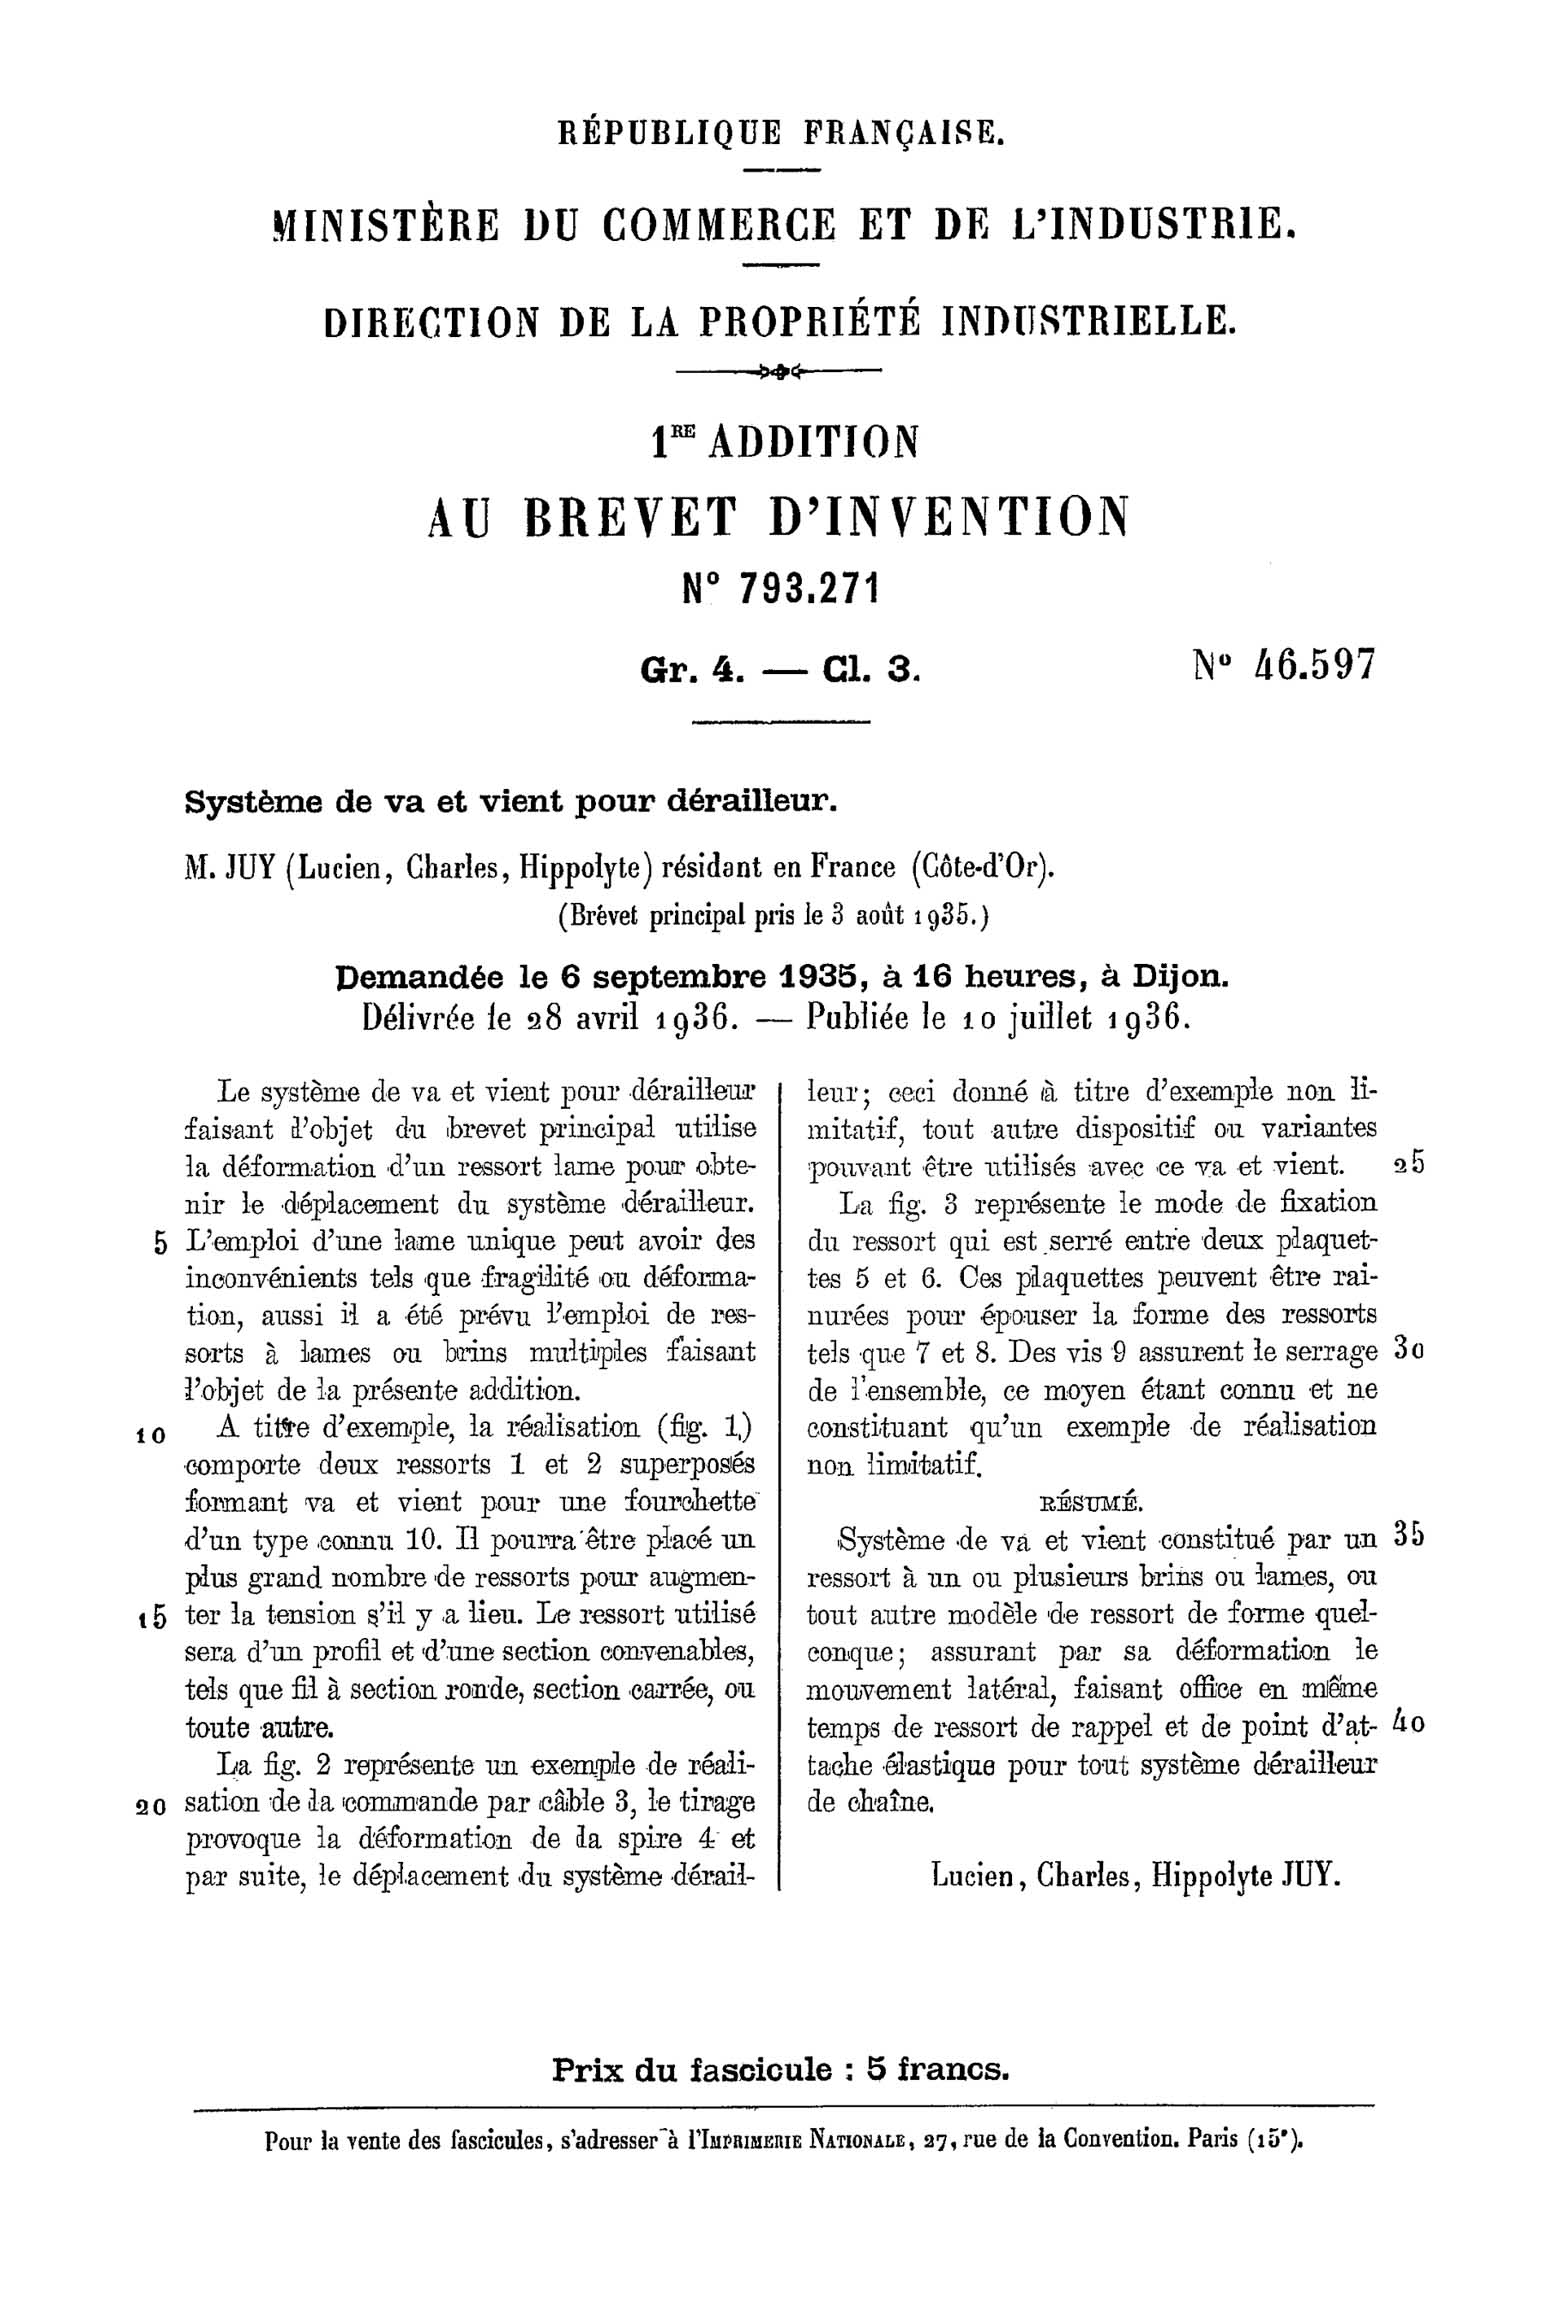 French Patent 793,271 Addition 46,597 - Simplex scan 1 main image